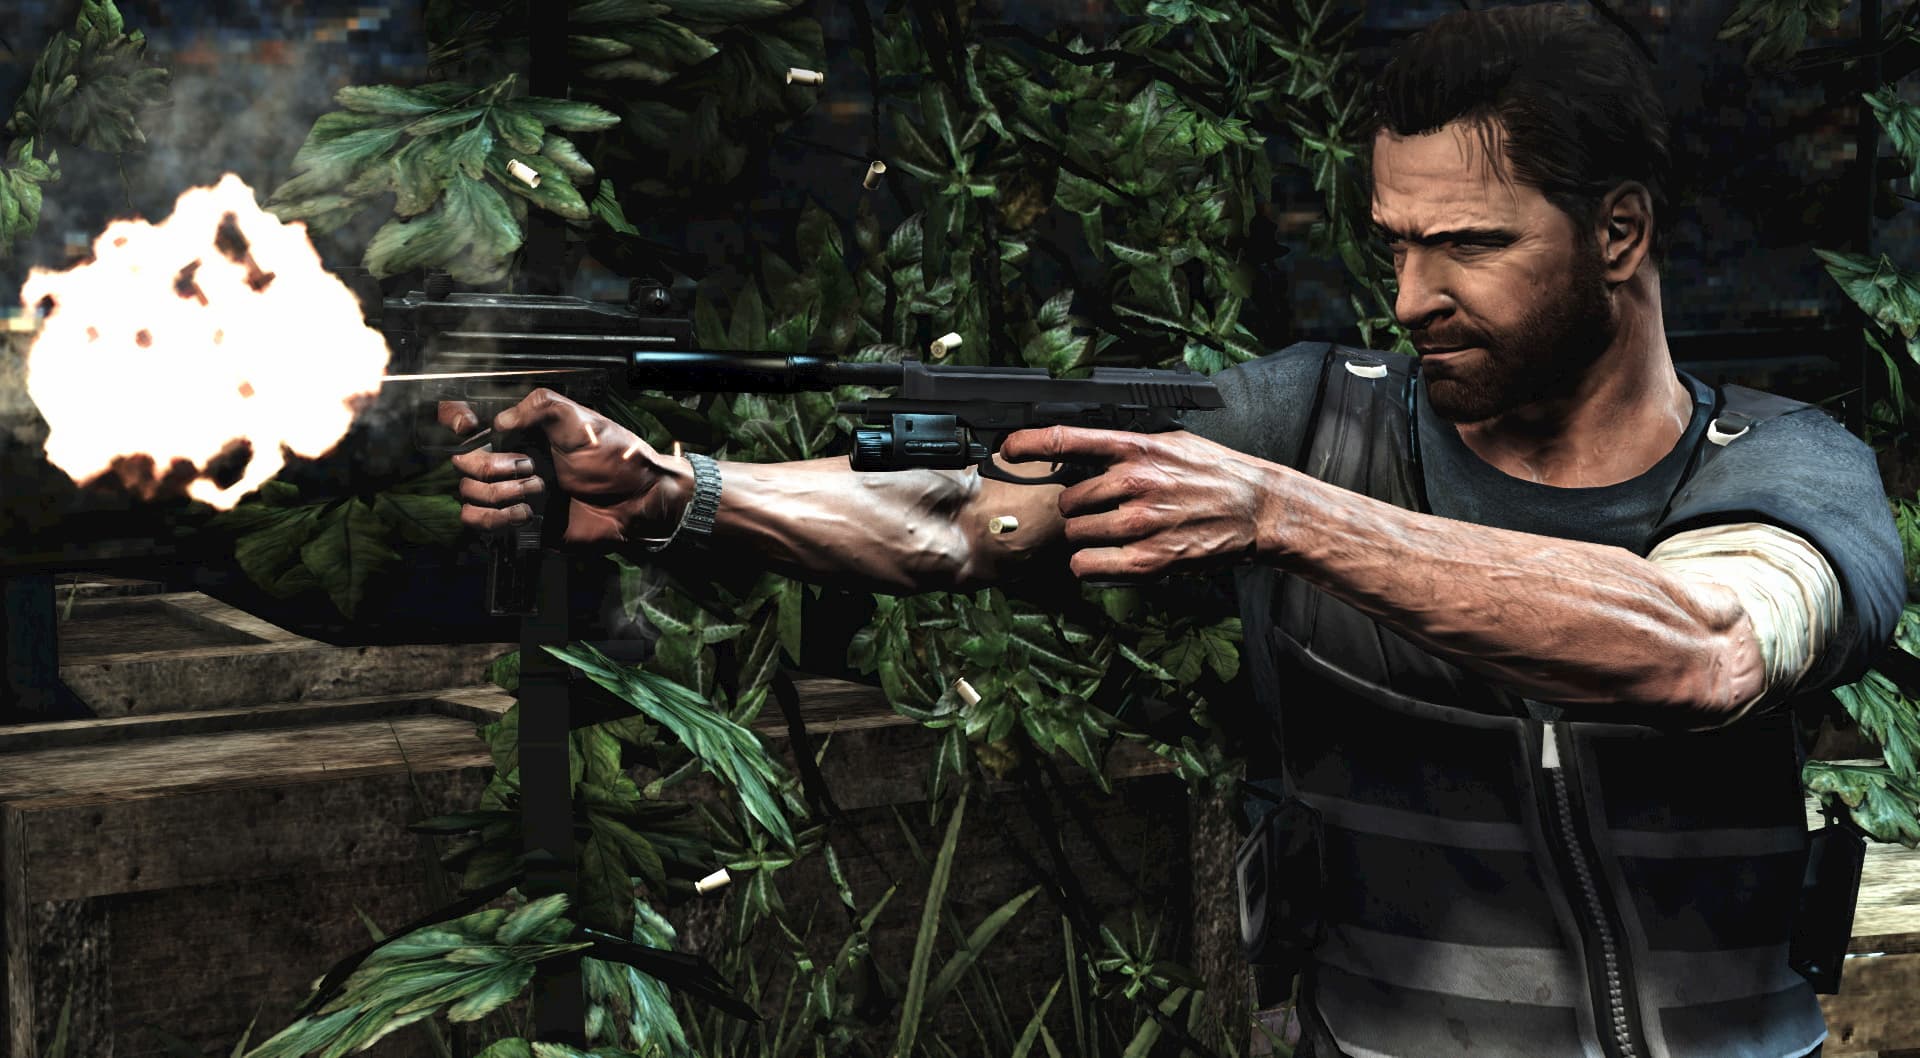 Buy Max Payne 3, PC, Rockstar Games Official Store